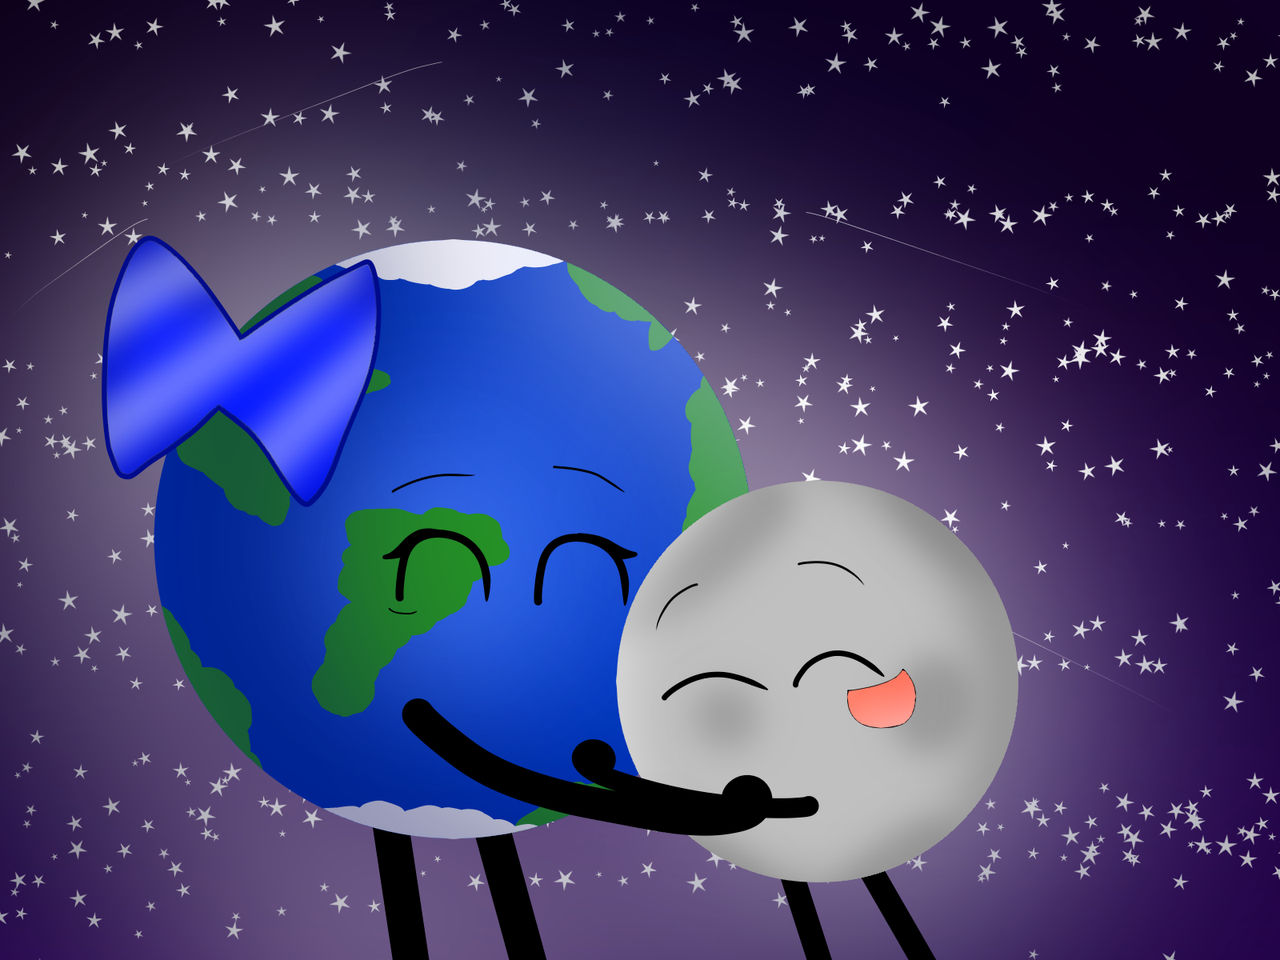 Earth and Moon GIF by kalbiv123 on DeviantArt